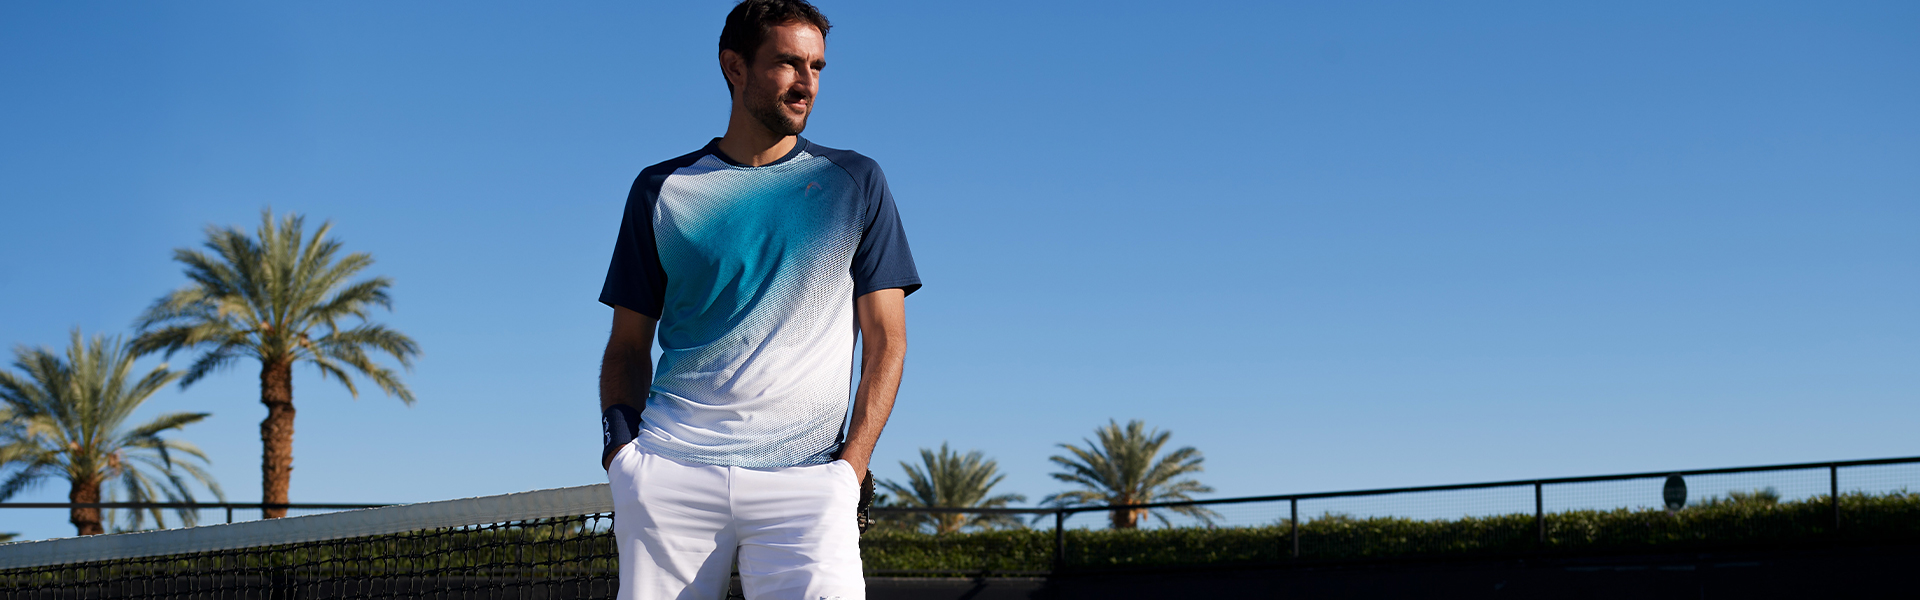 Winning in Style: Marin Cilic's Search for Greatness